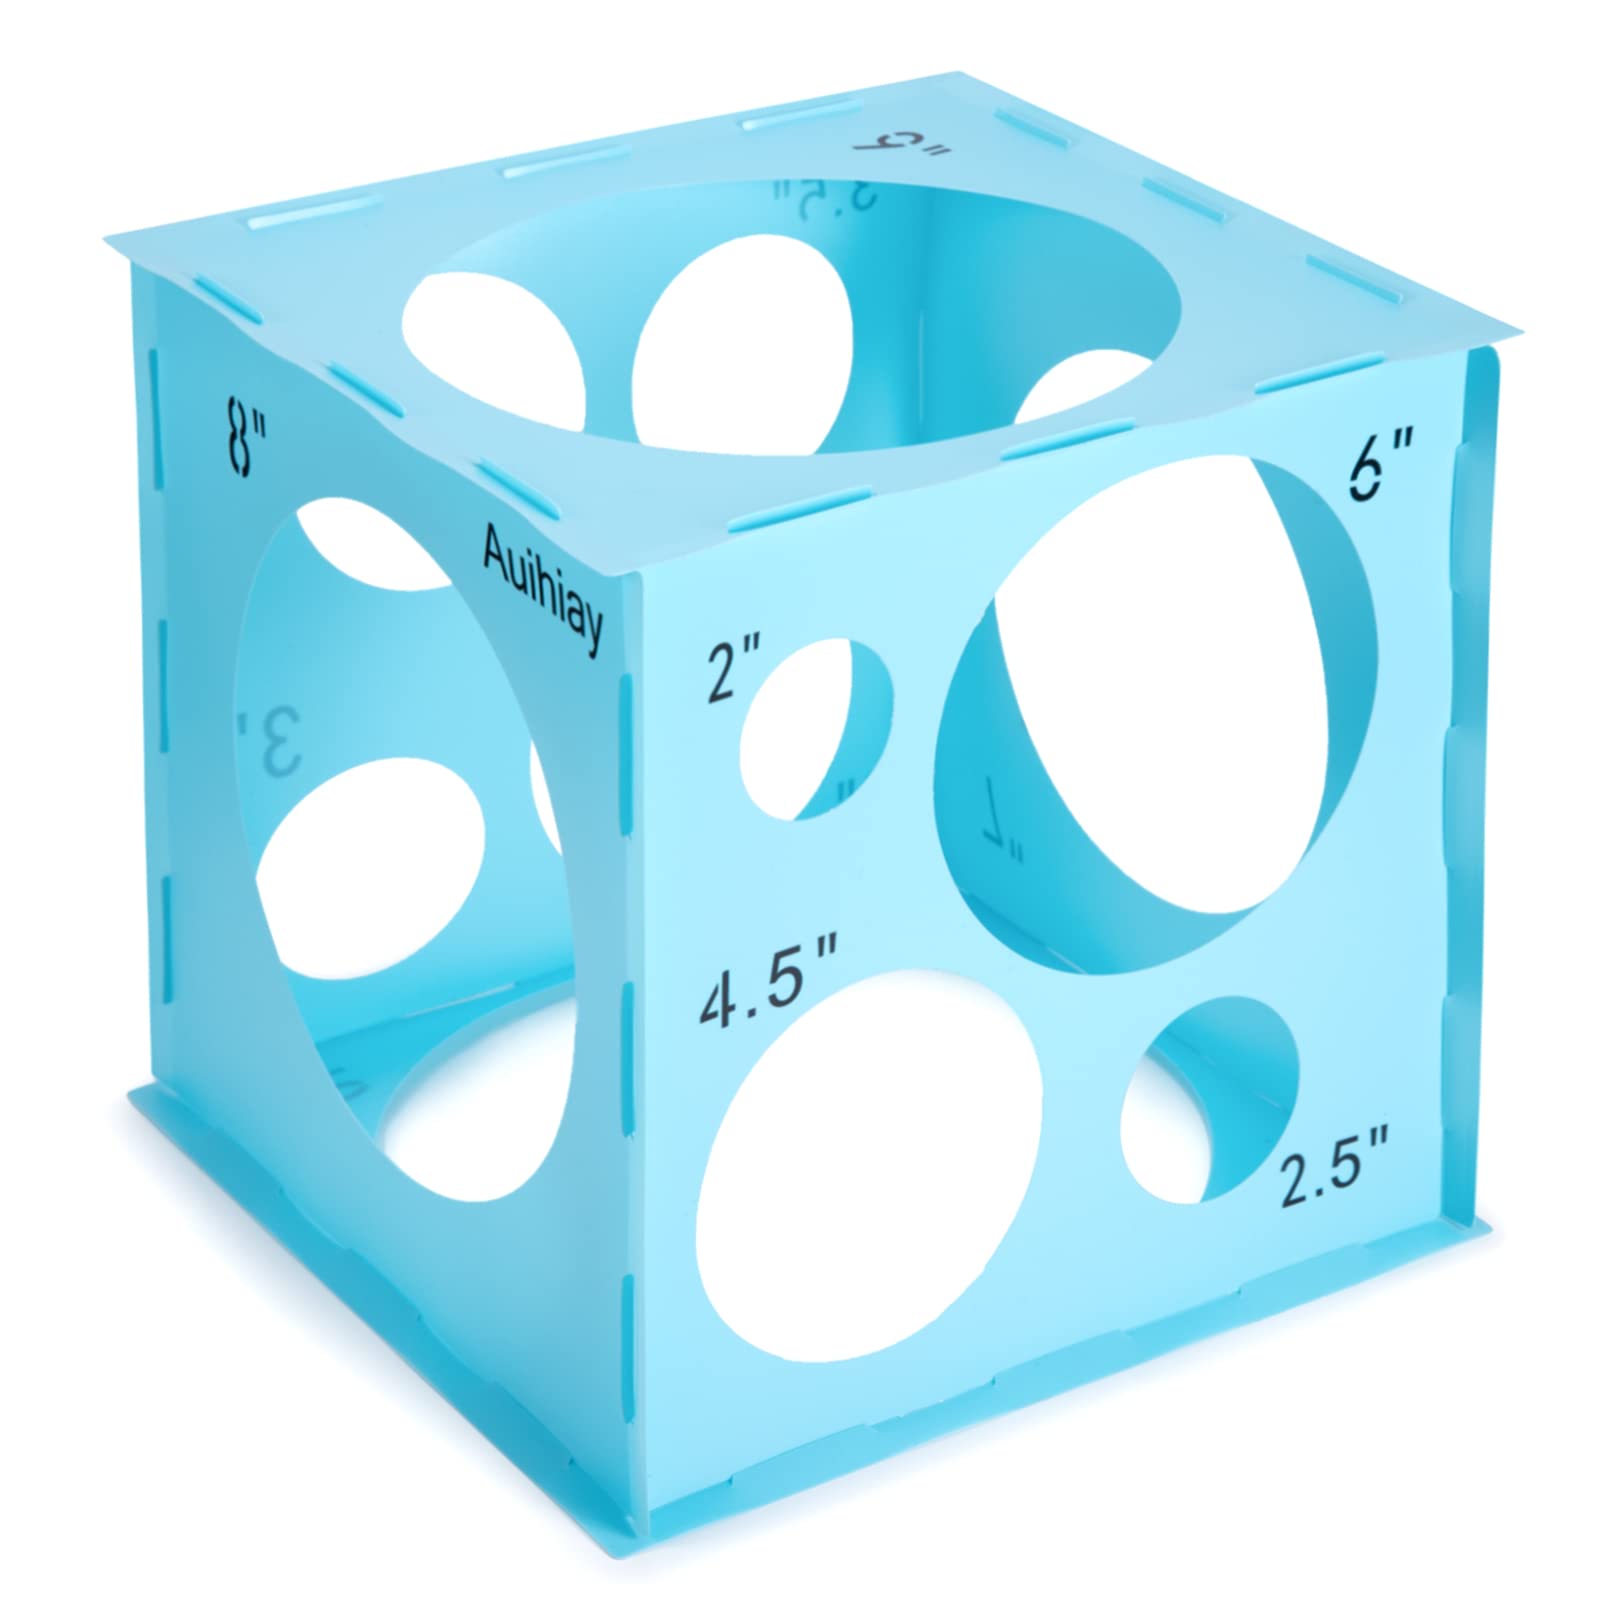 Auihiay 9 Holes Collapsible Wood Balloon Sizer Box Cube, Balloon Size Measurement Tool for Balloon Decorations, Balloon Arches, Balloon Columns